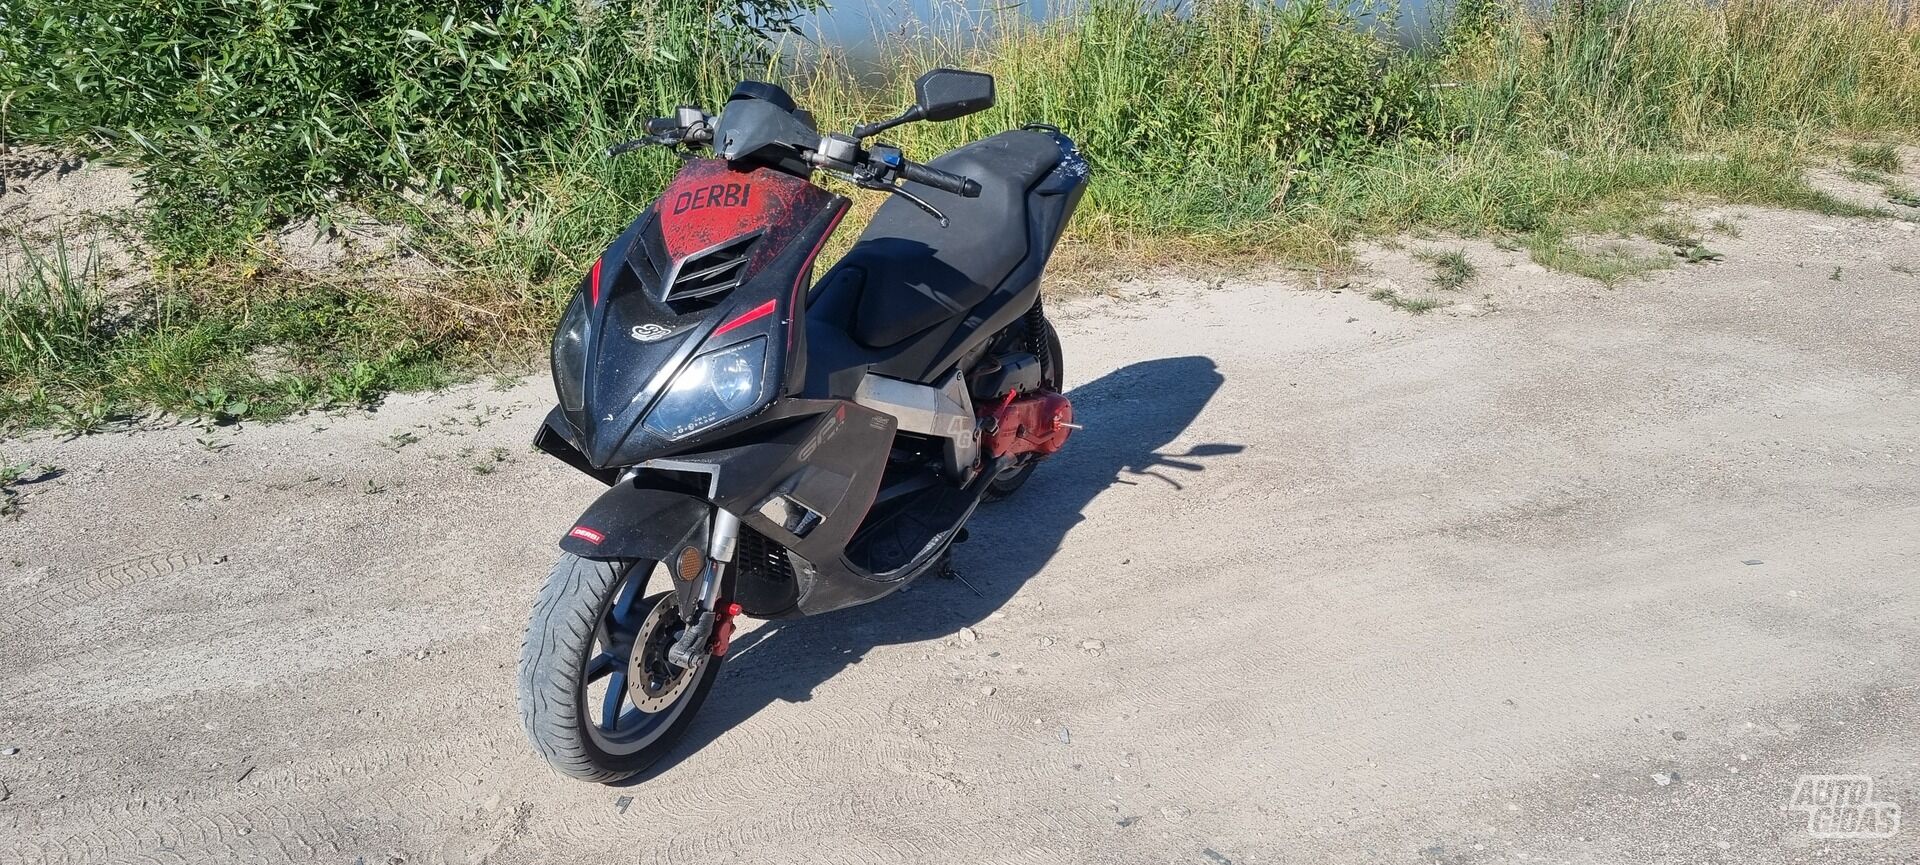 Derbi GP1 2008 y Scooter / moped